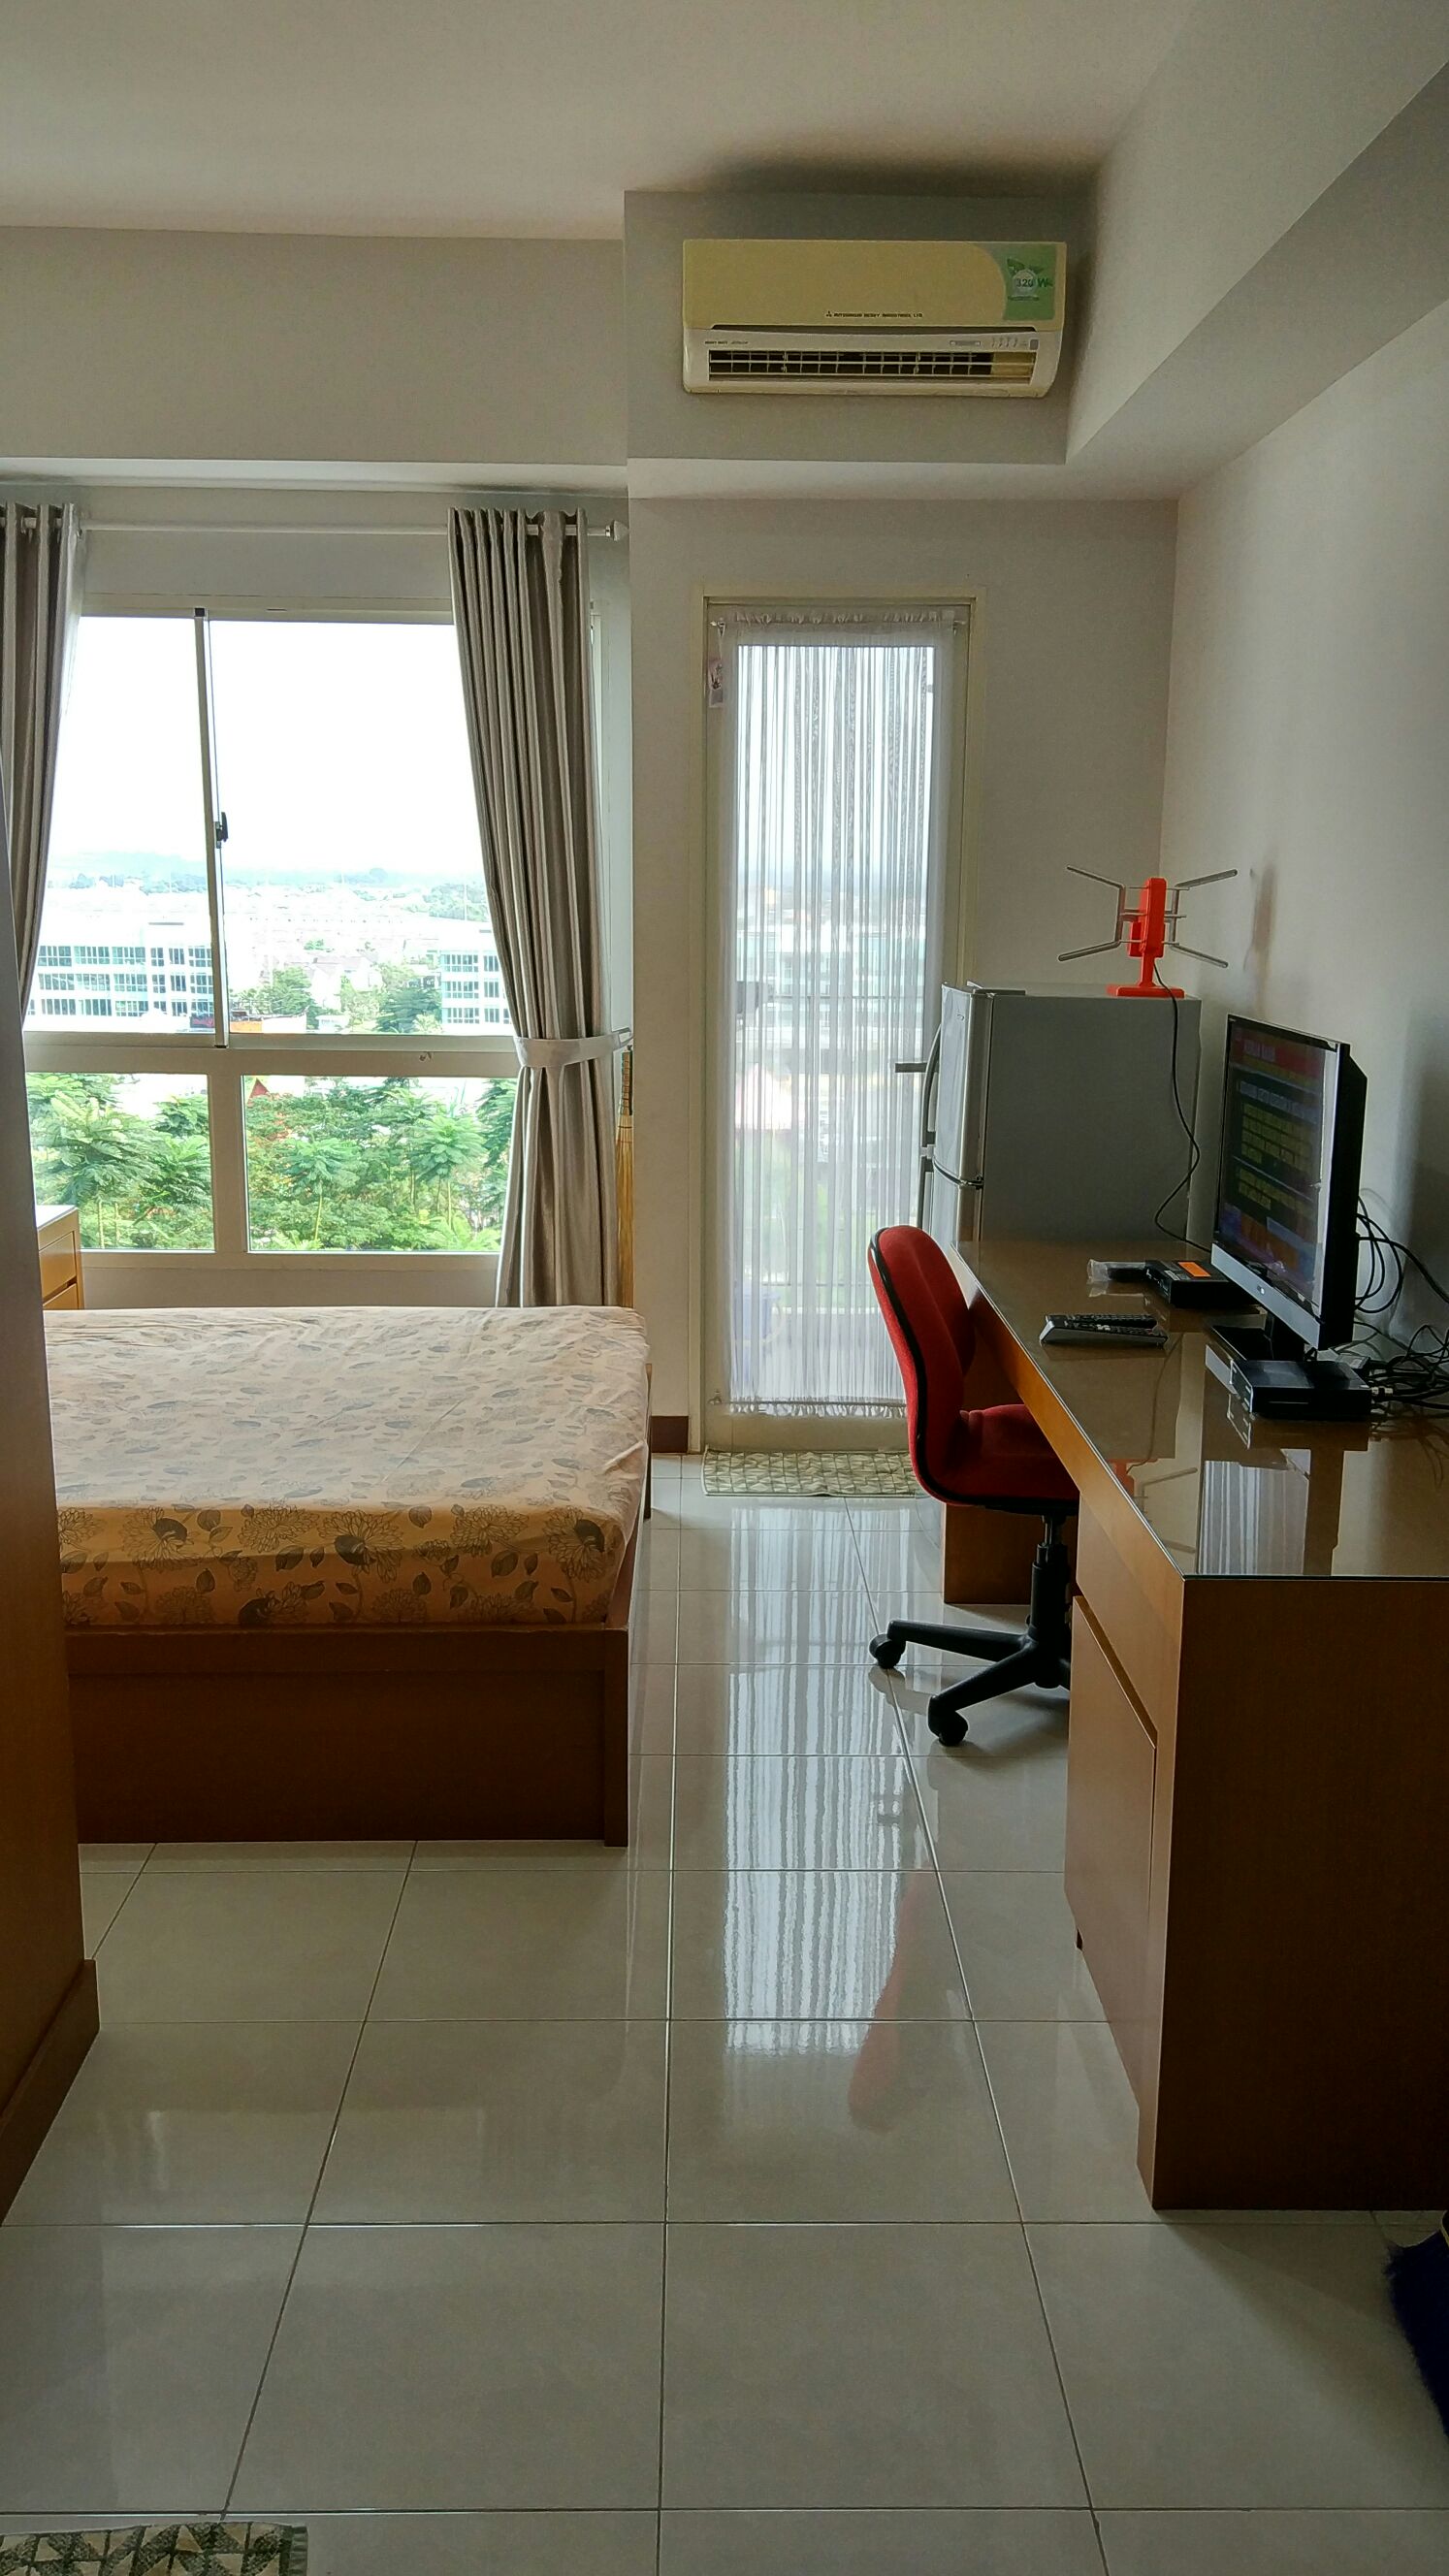 Scientia Gading Serpong w/ portable wifi - Apartments for Rent in